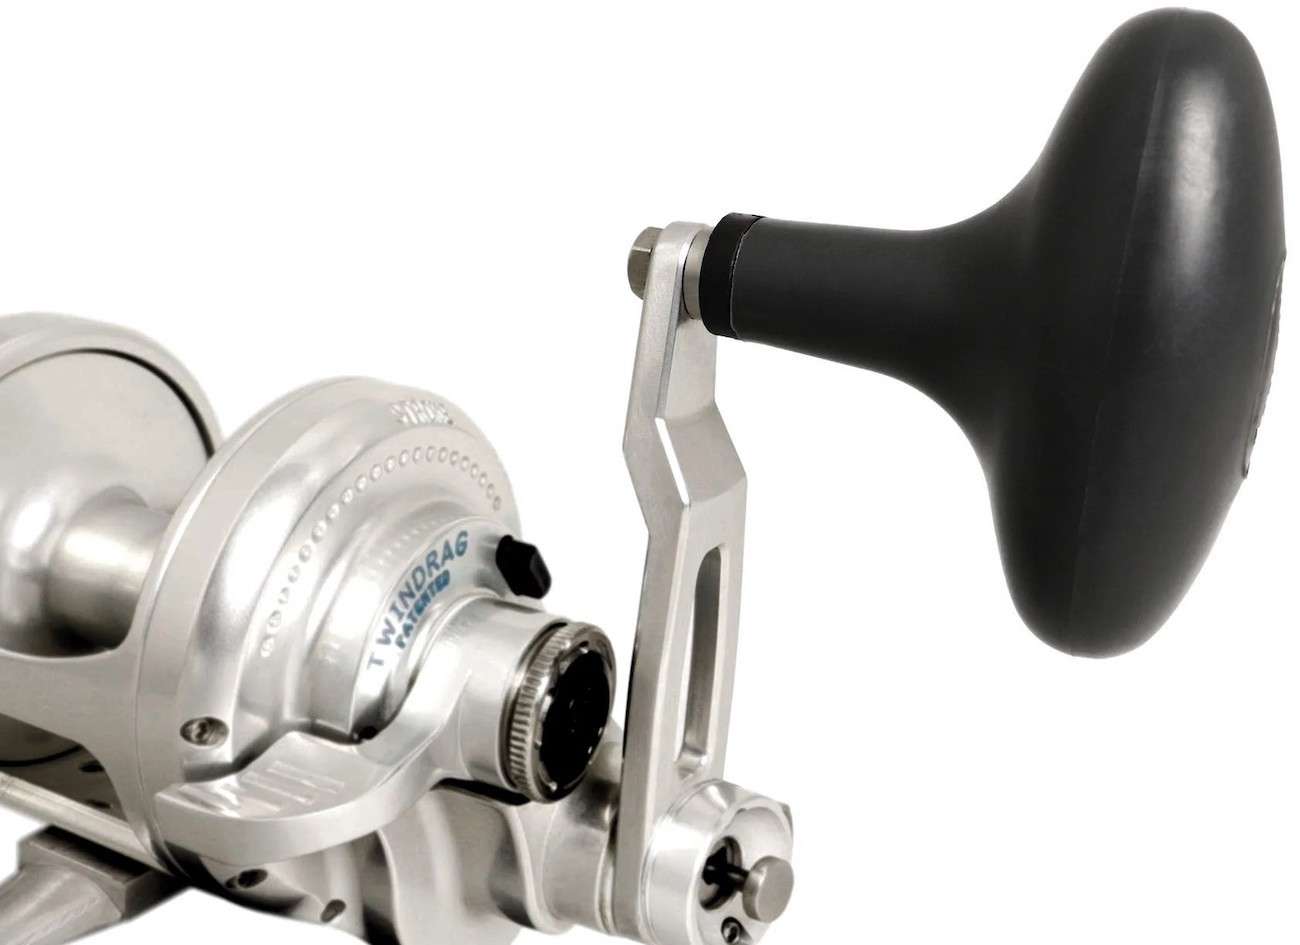 Accurate BX2-50-S Boss Extreme 2-Speed Reel - TackleDirect